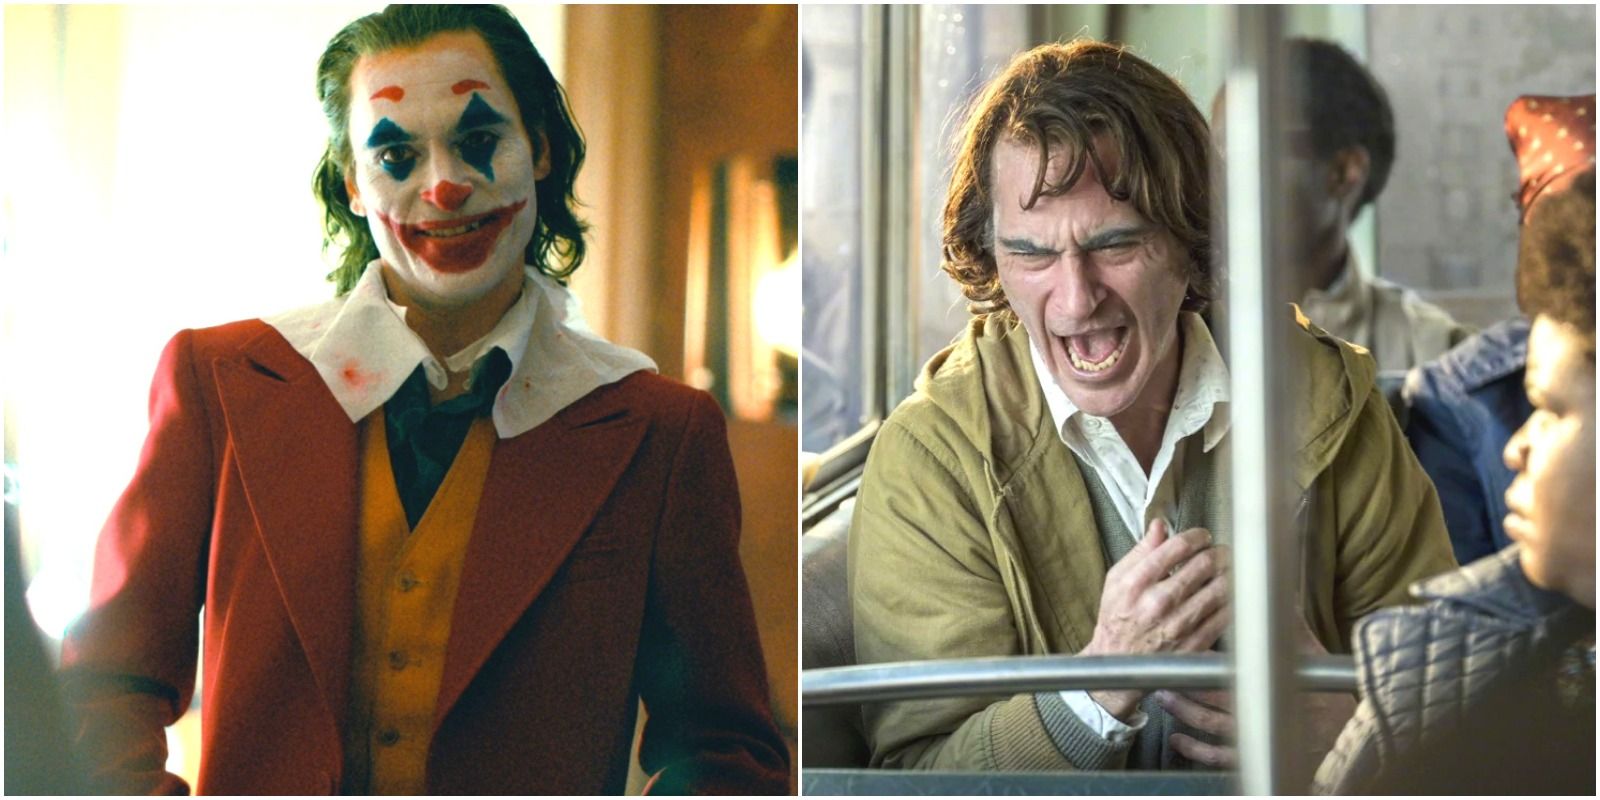 Arthur Fleck as the Joker and as himself crying on a bus from the Joker Film